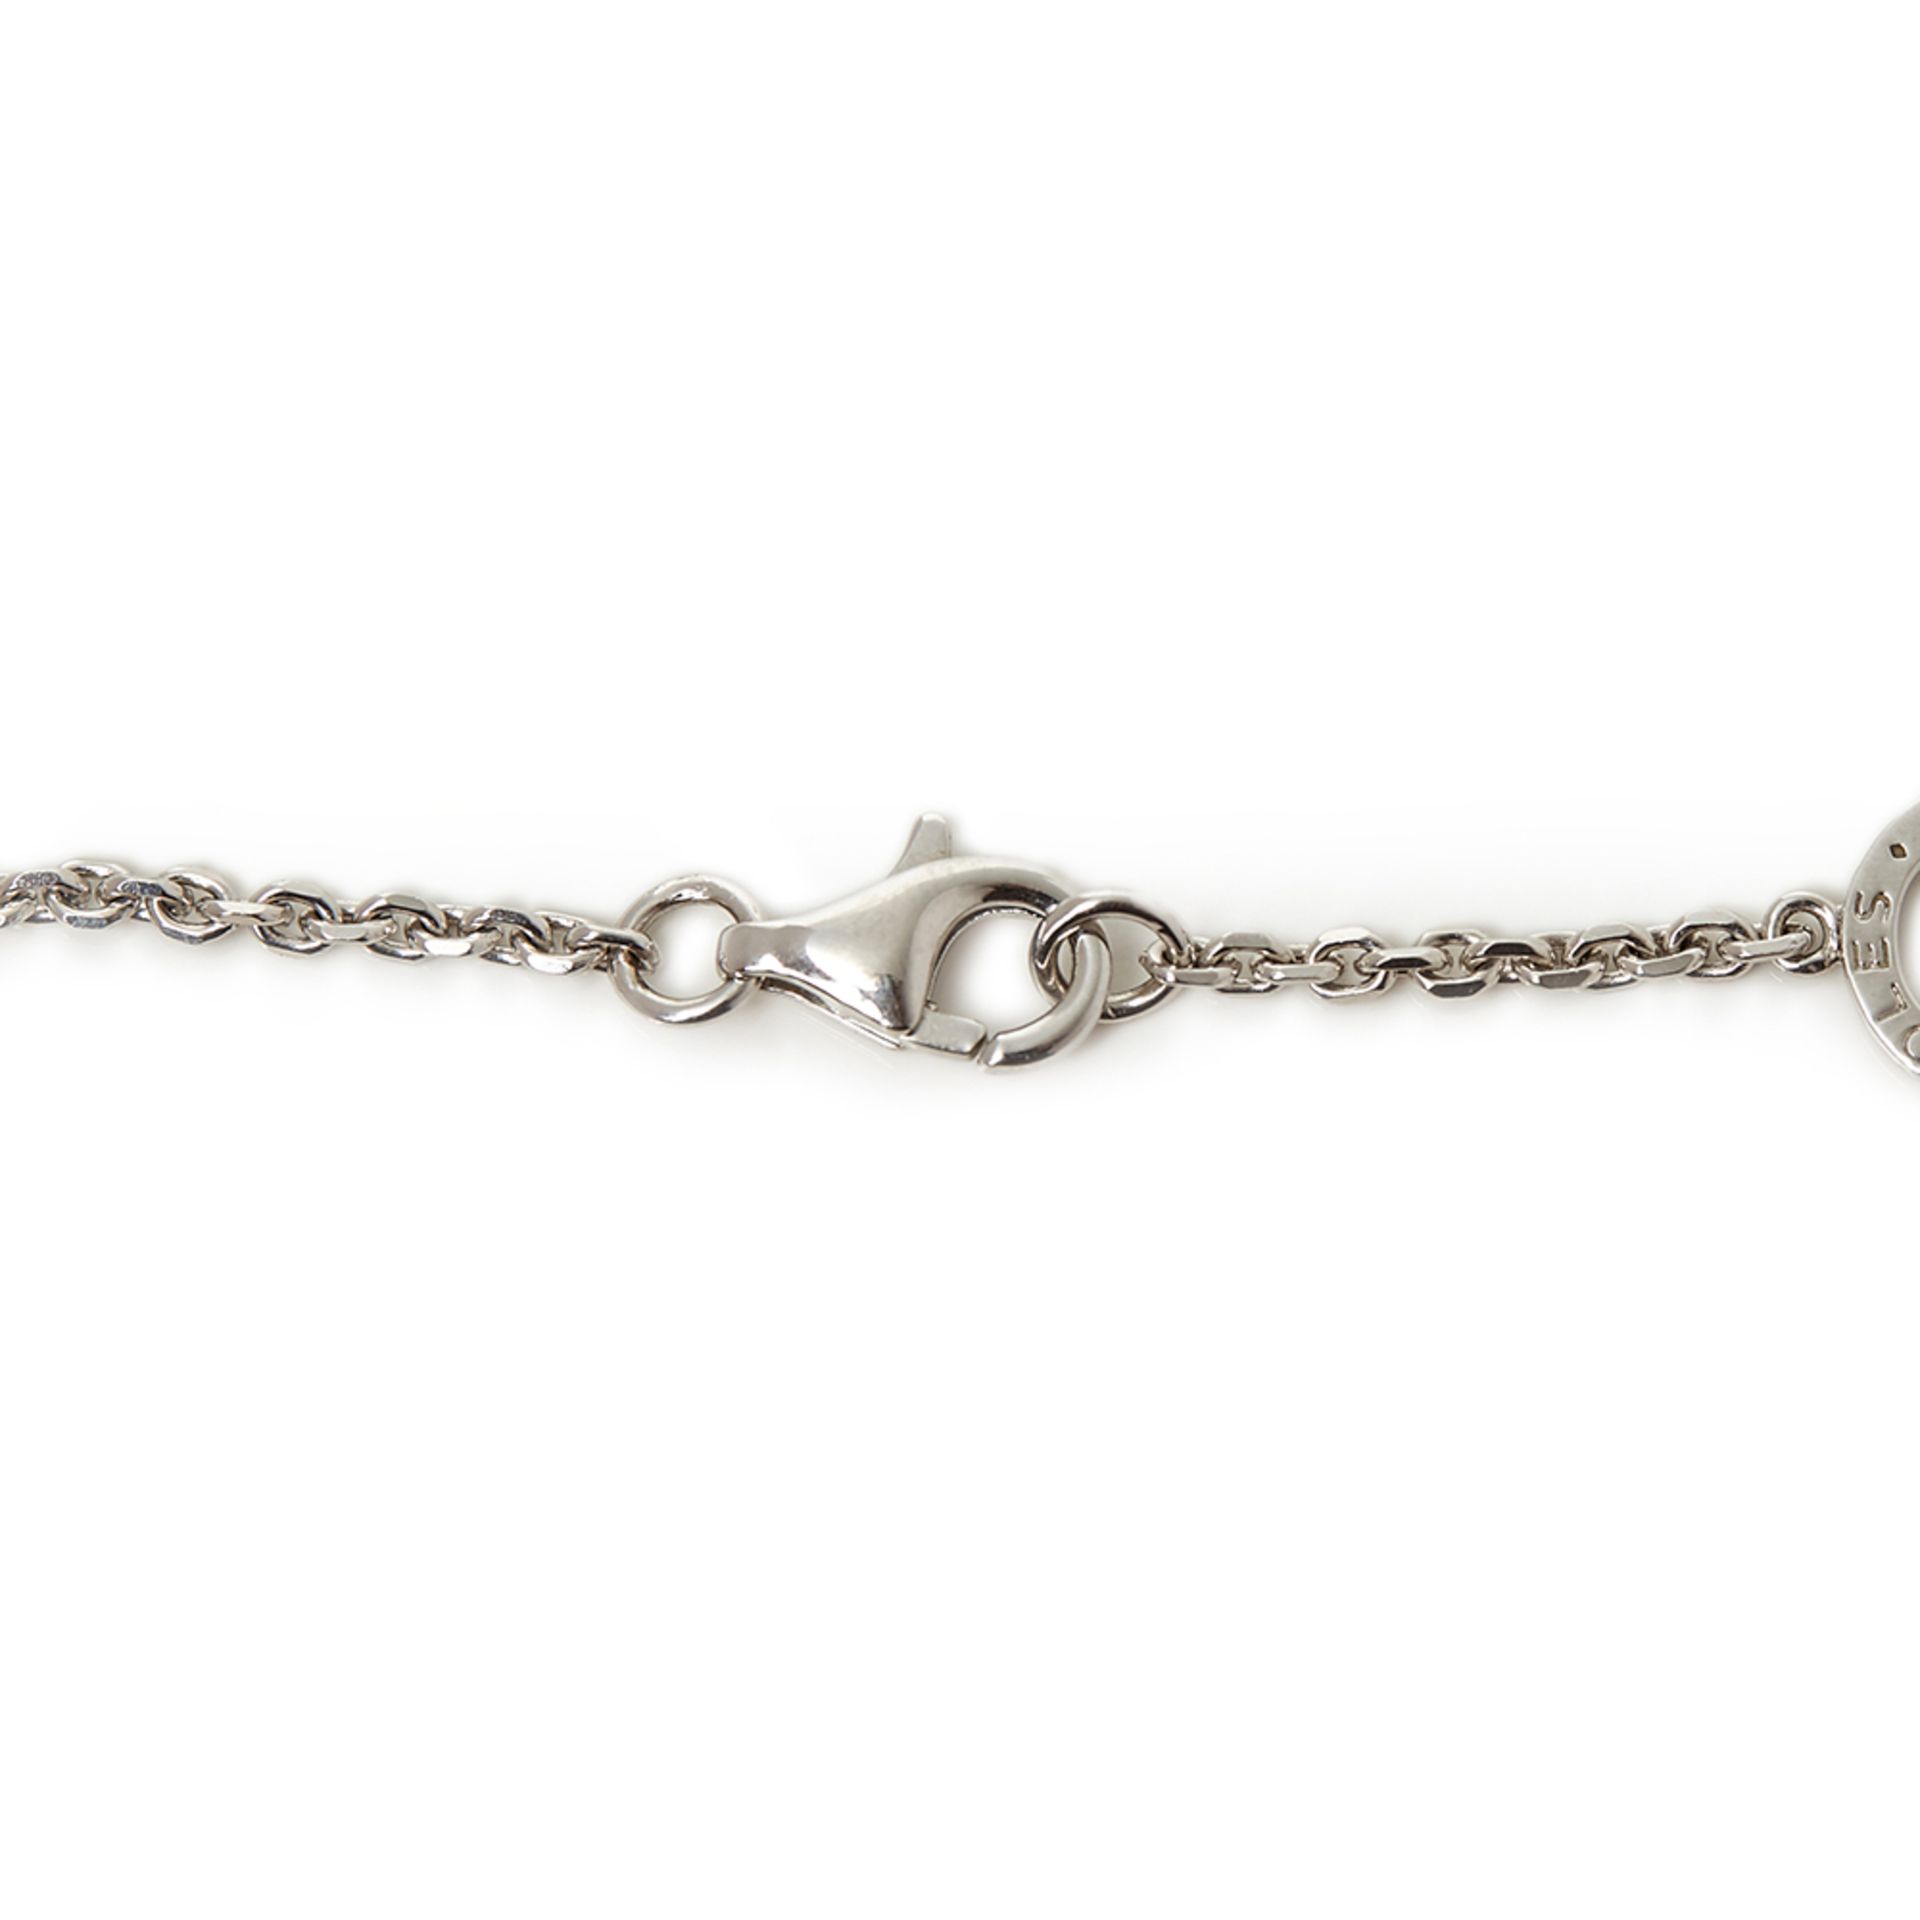 Boodles 18k White Gold Diamond Blossom Necklace - Image 8 of 9